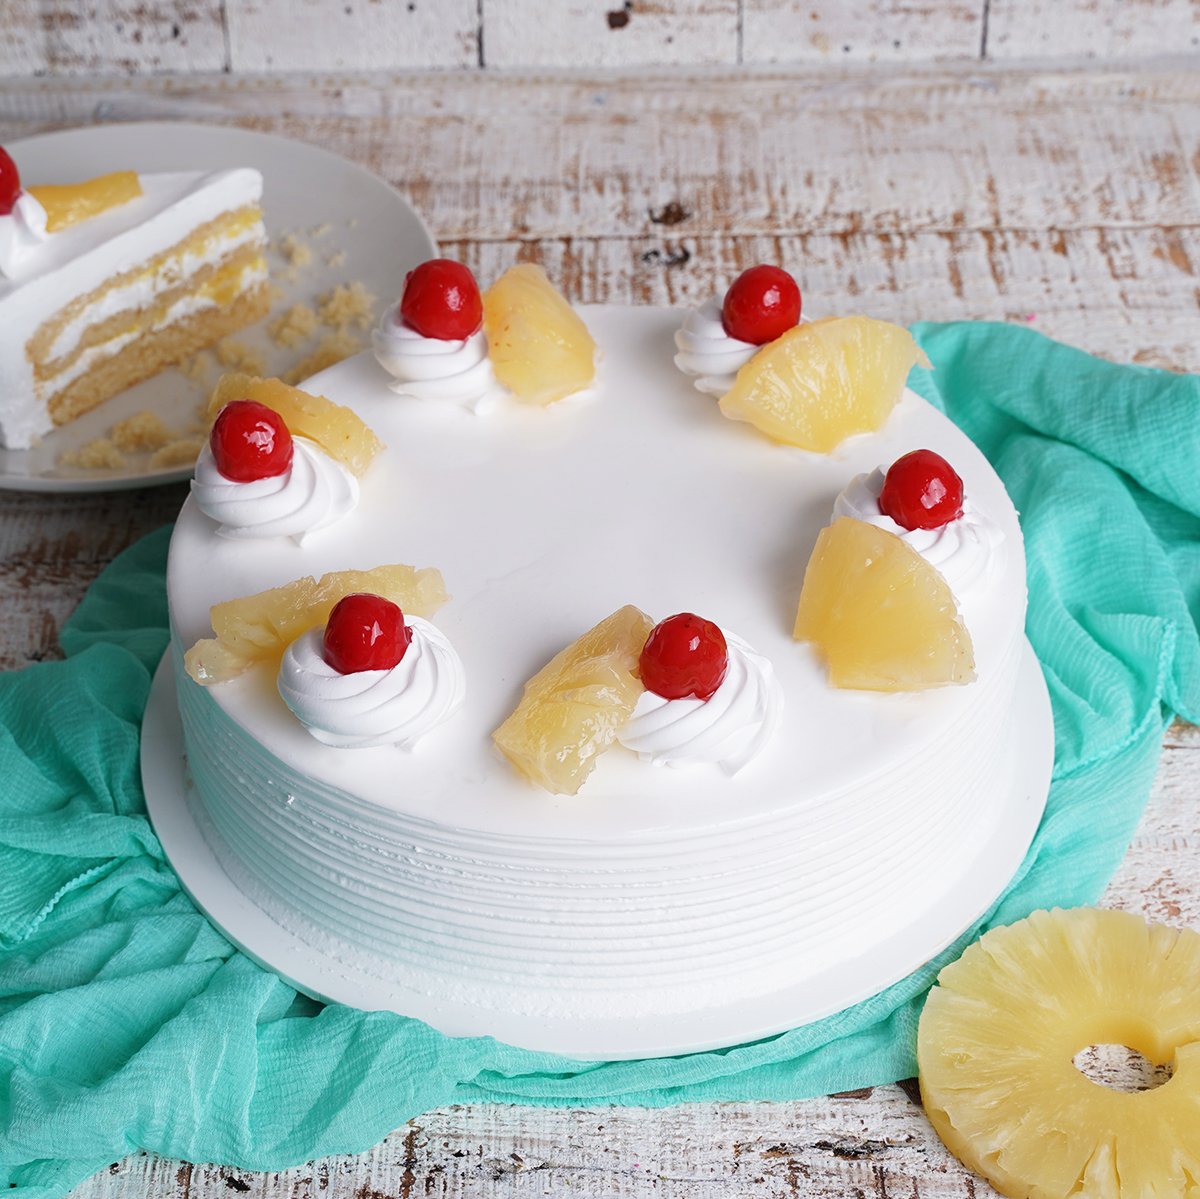 Buy Delicious Pineapple Cakes Online - Fresh and Handmade